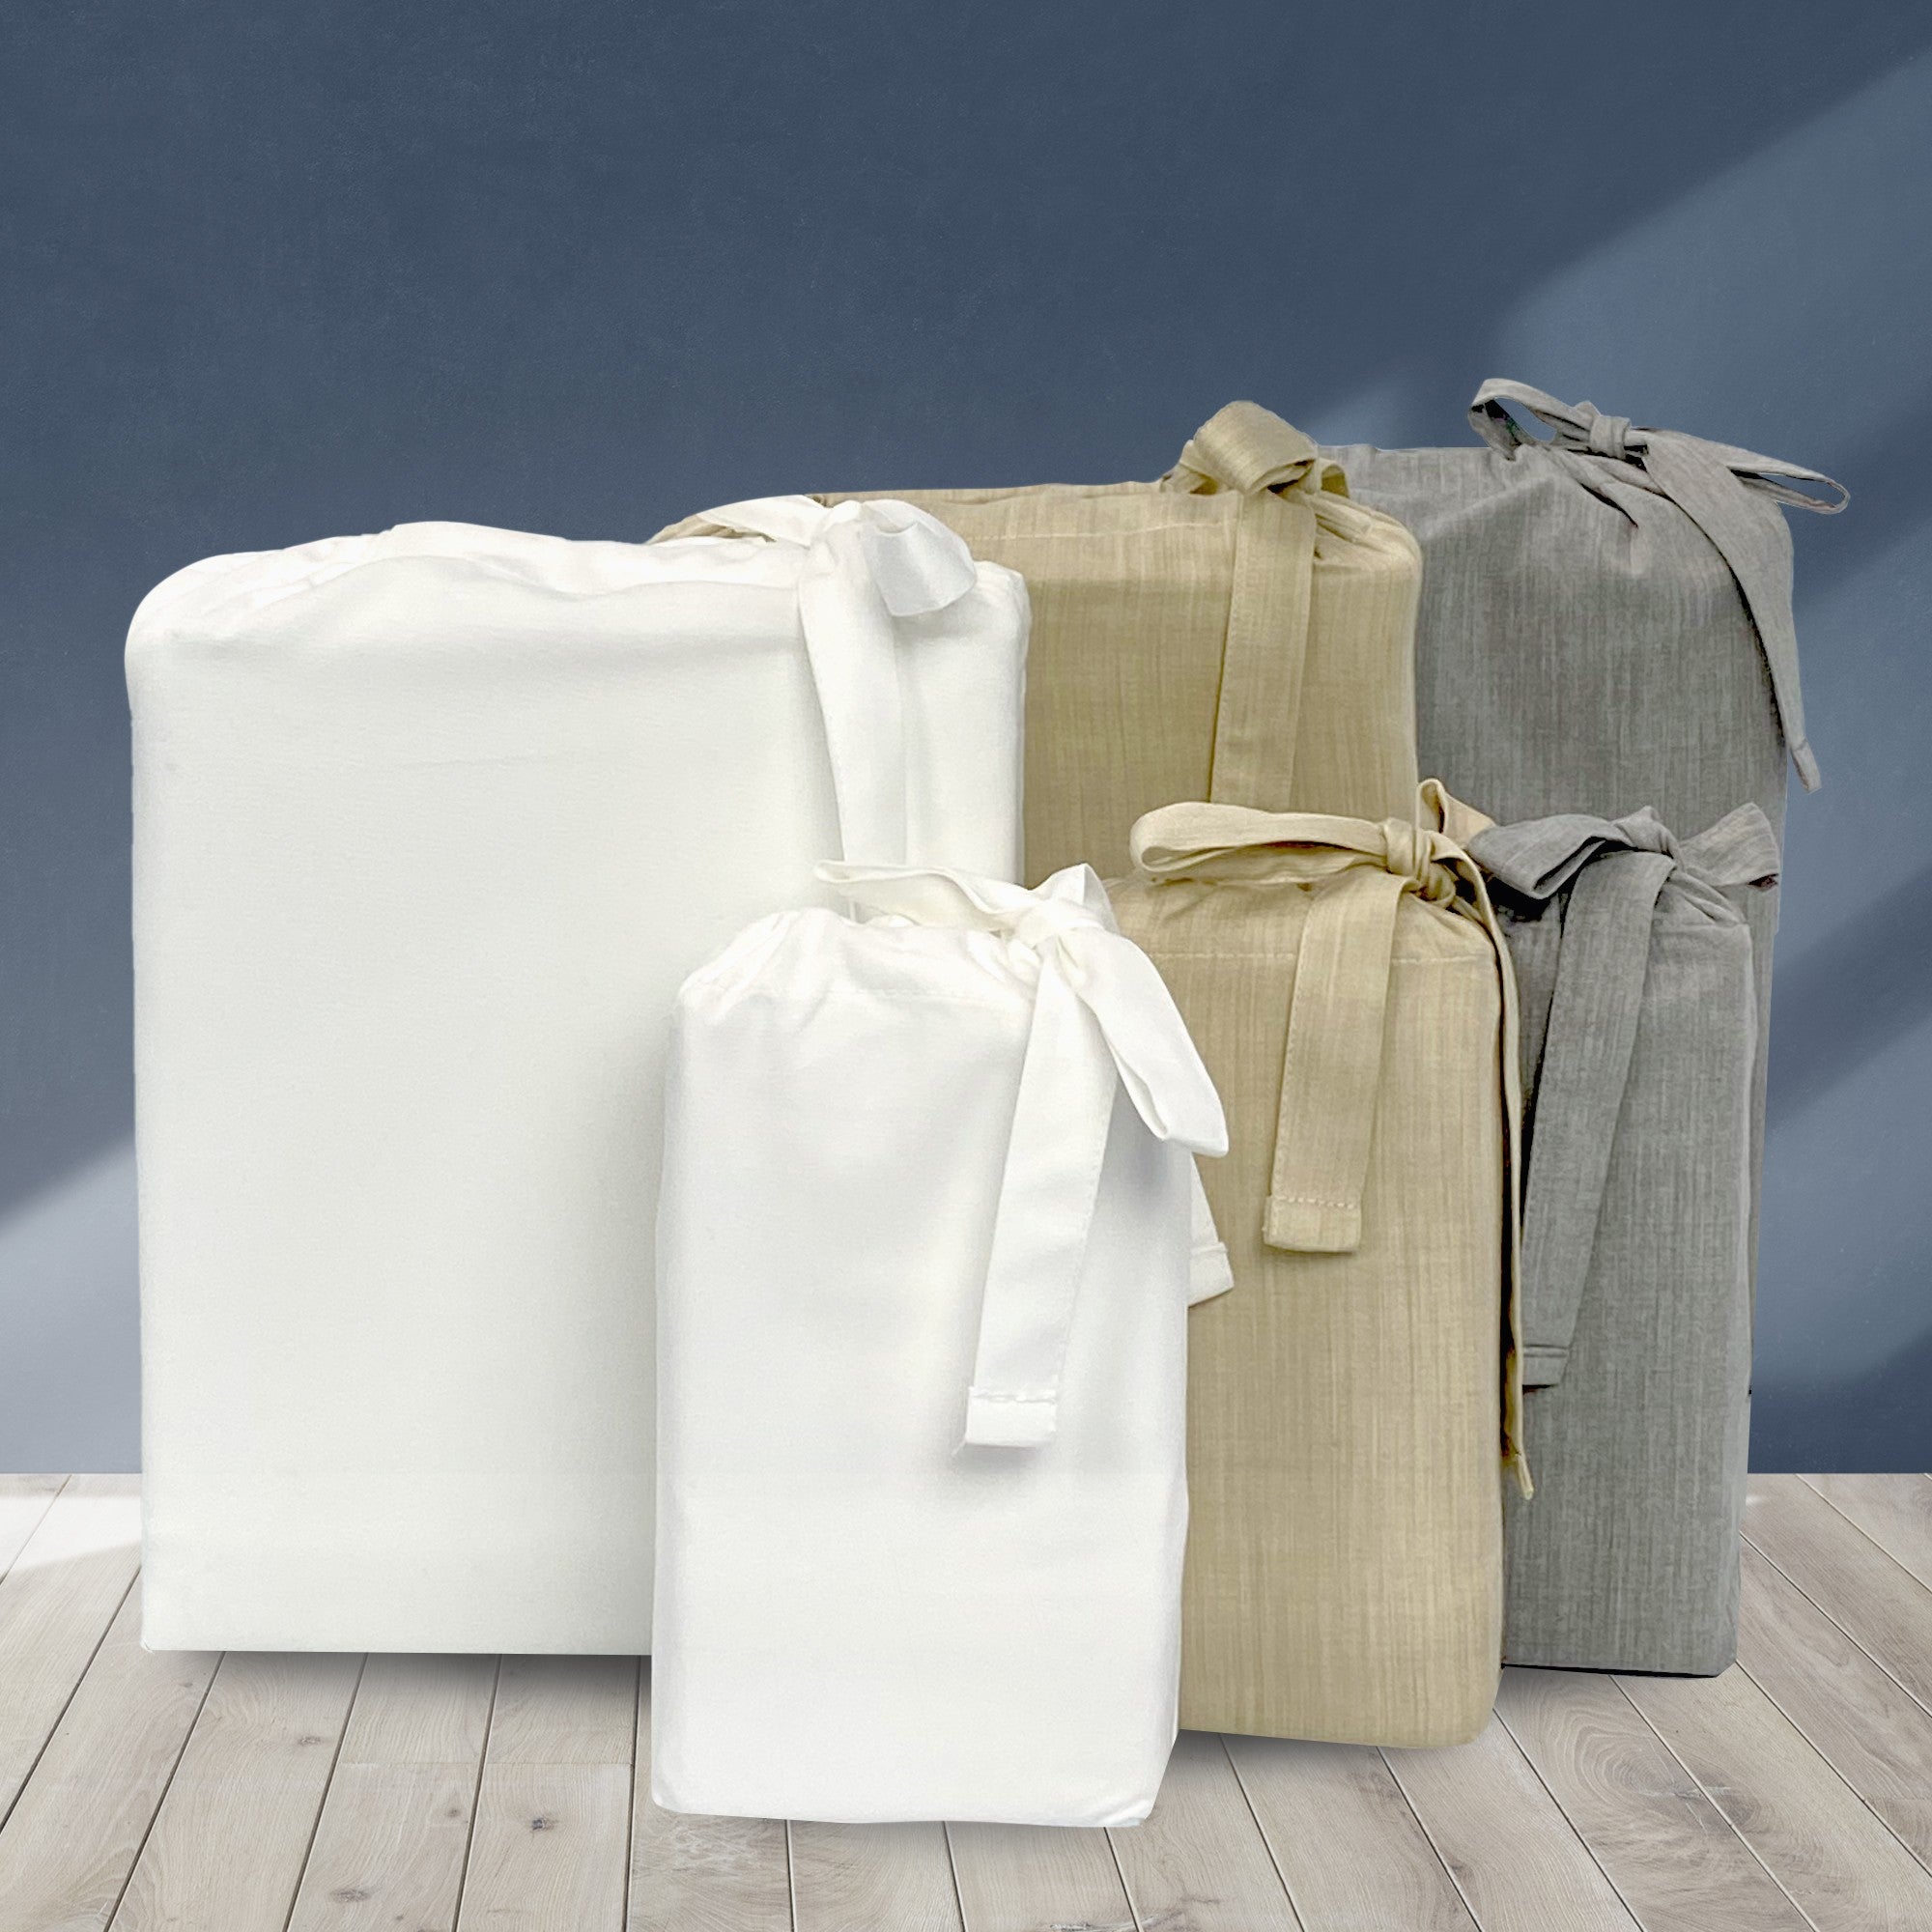 MELANGE Bamboo Sheet Sets - Deep Pockets Fit Most Mattresses, 360 Durable Elastic for a Stay-Put Fitted Sheets -  Snow